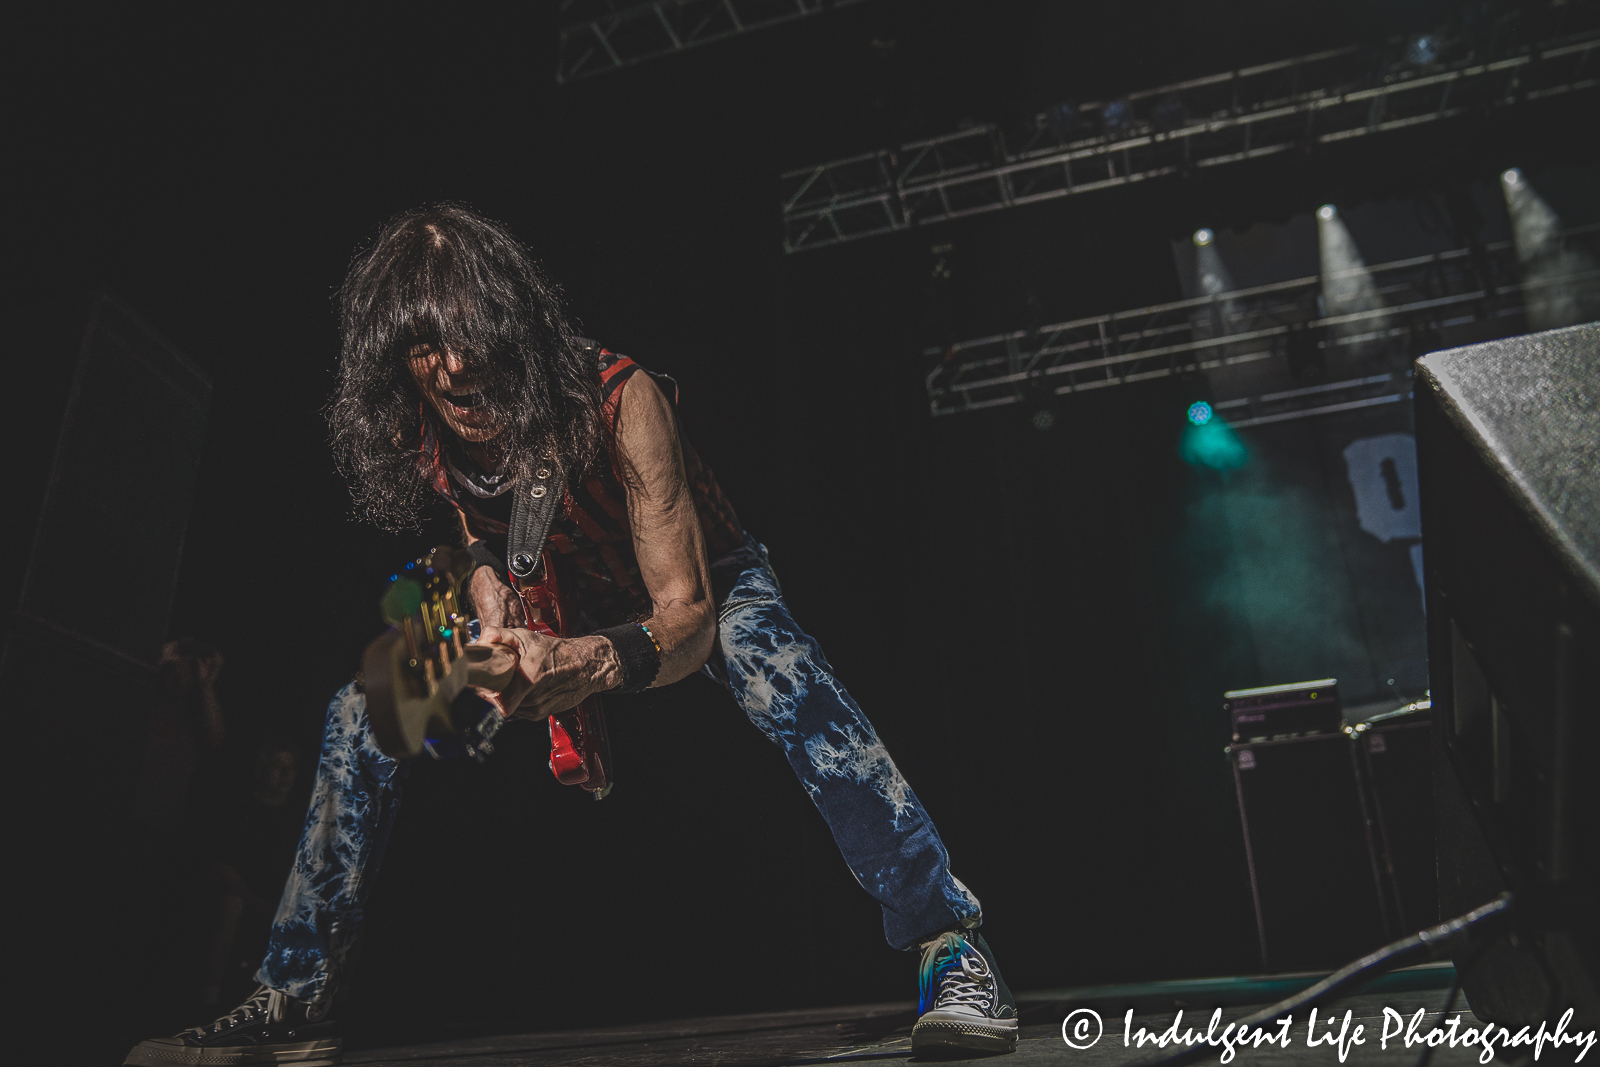 Quiet Riot bass guitarist Rudo Sarzo live in concert at Ameristar Casino's Star Pavilion in Kansas City, MO on July 29, 2022.